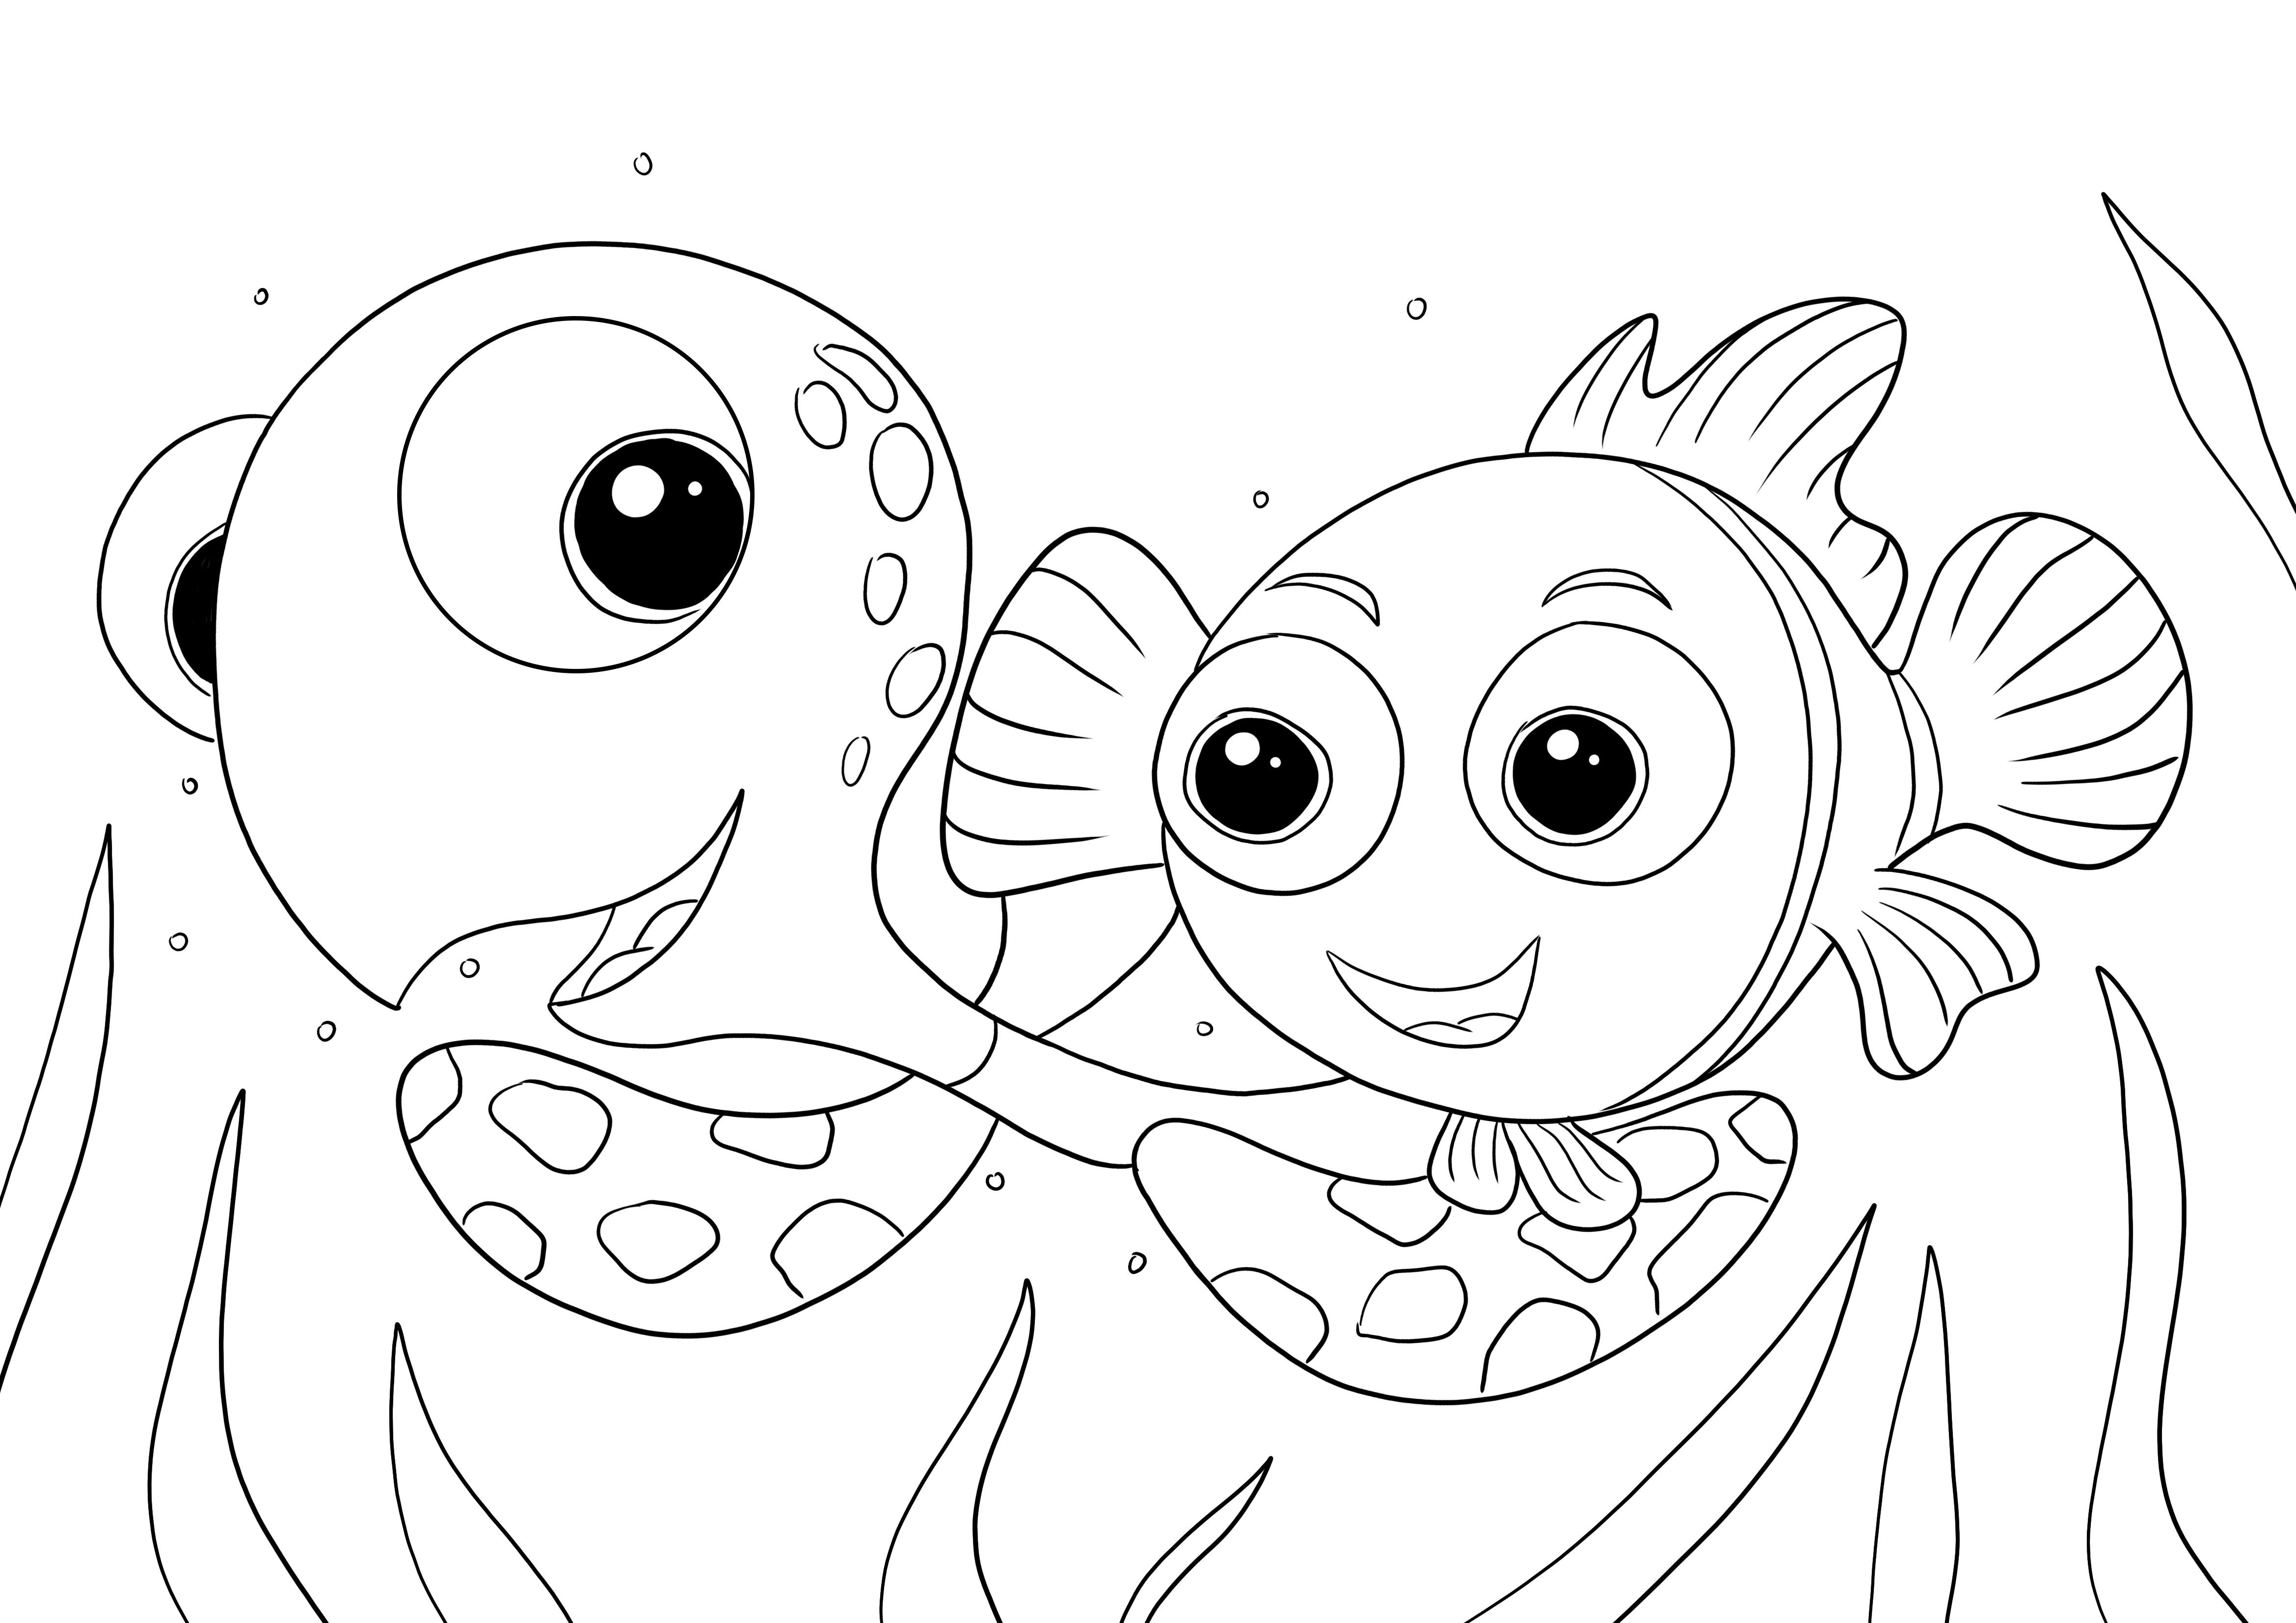 Coloring image of Nemo on Crush's back free to print or download for kids